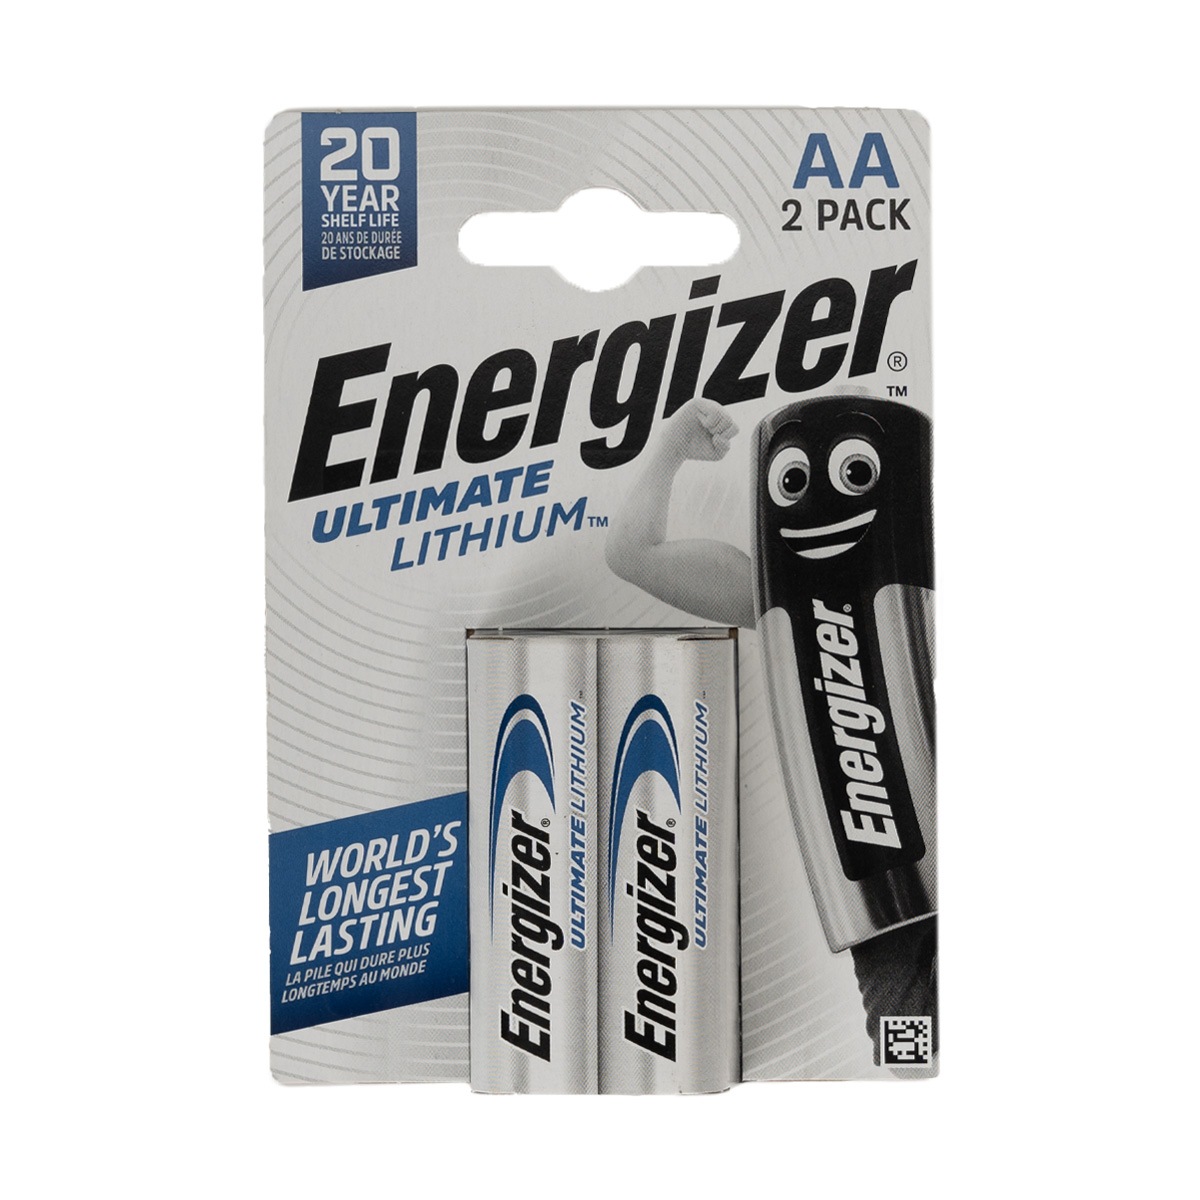 2 AA Energizer Ultimate Lithium L91 - 1.5V - AA / 14500 - Lithium - Piles  jetables